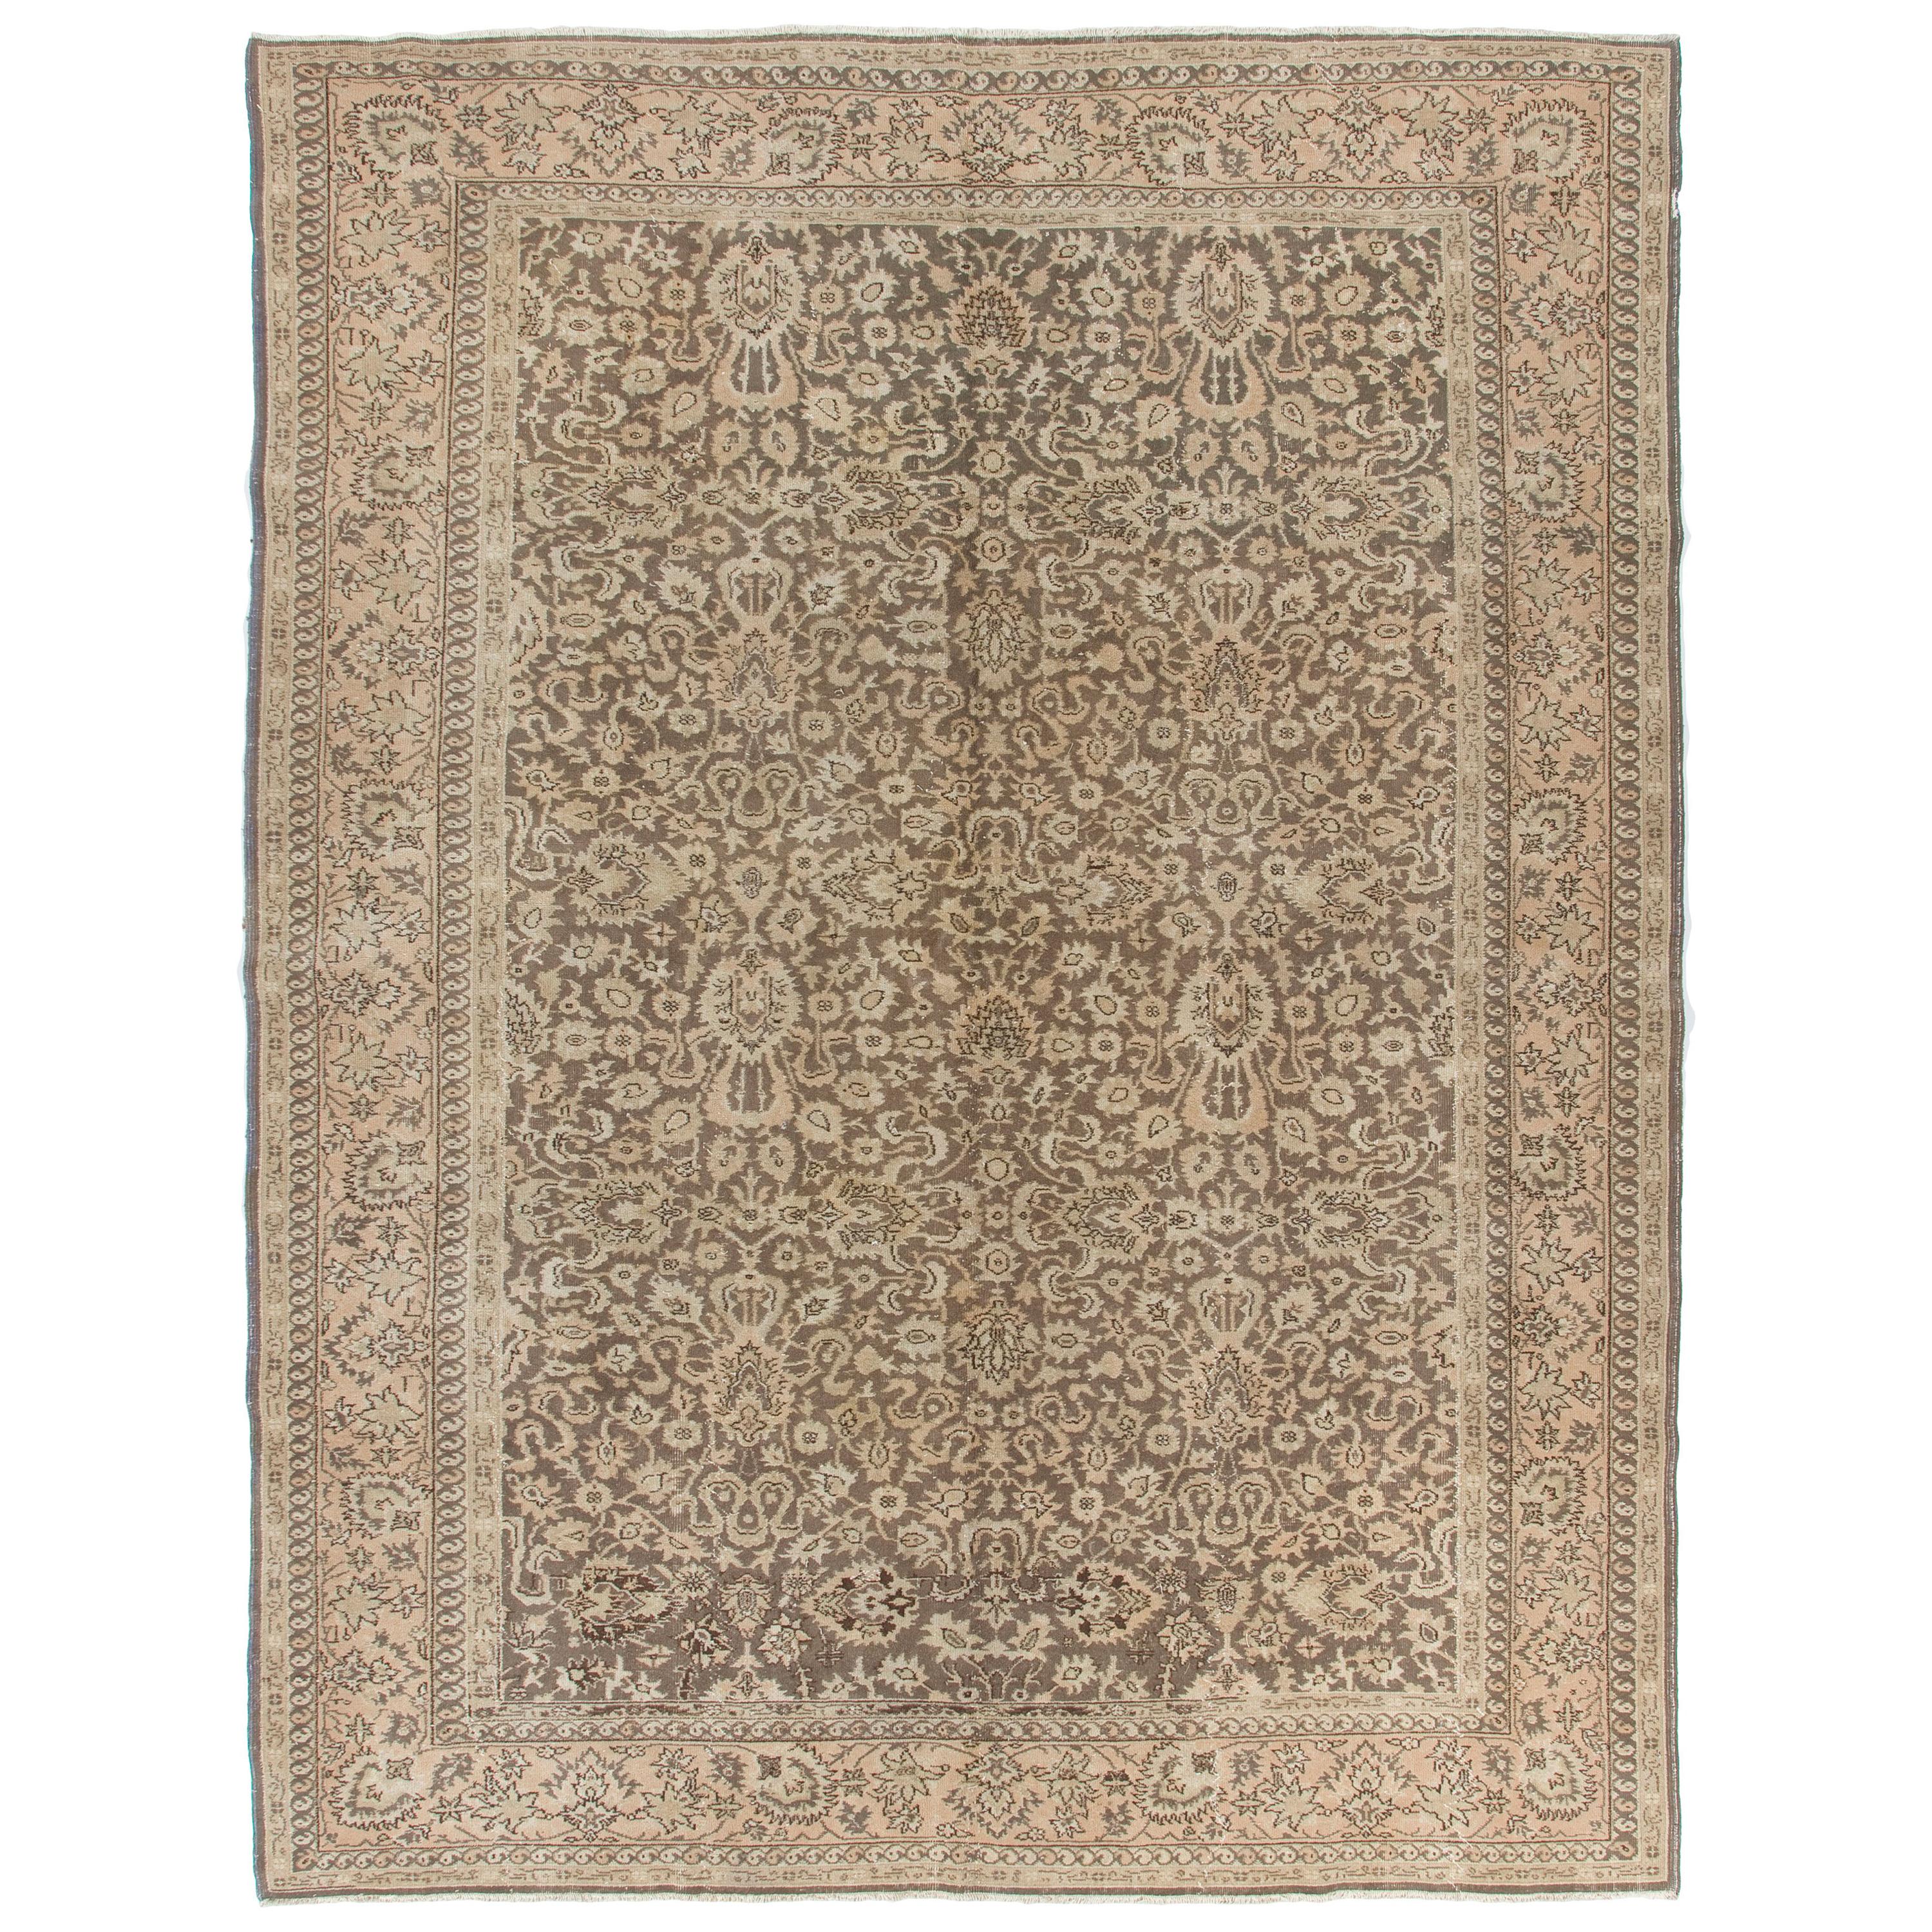 9.2x12 Ft One-of-a-Kind Turkish Sivas Rug in Soft Taupe Brown and Beige Colors For Sale